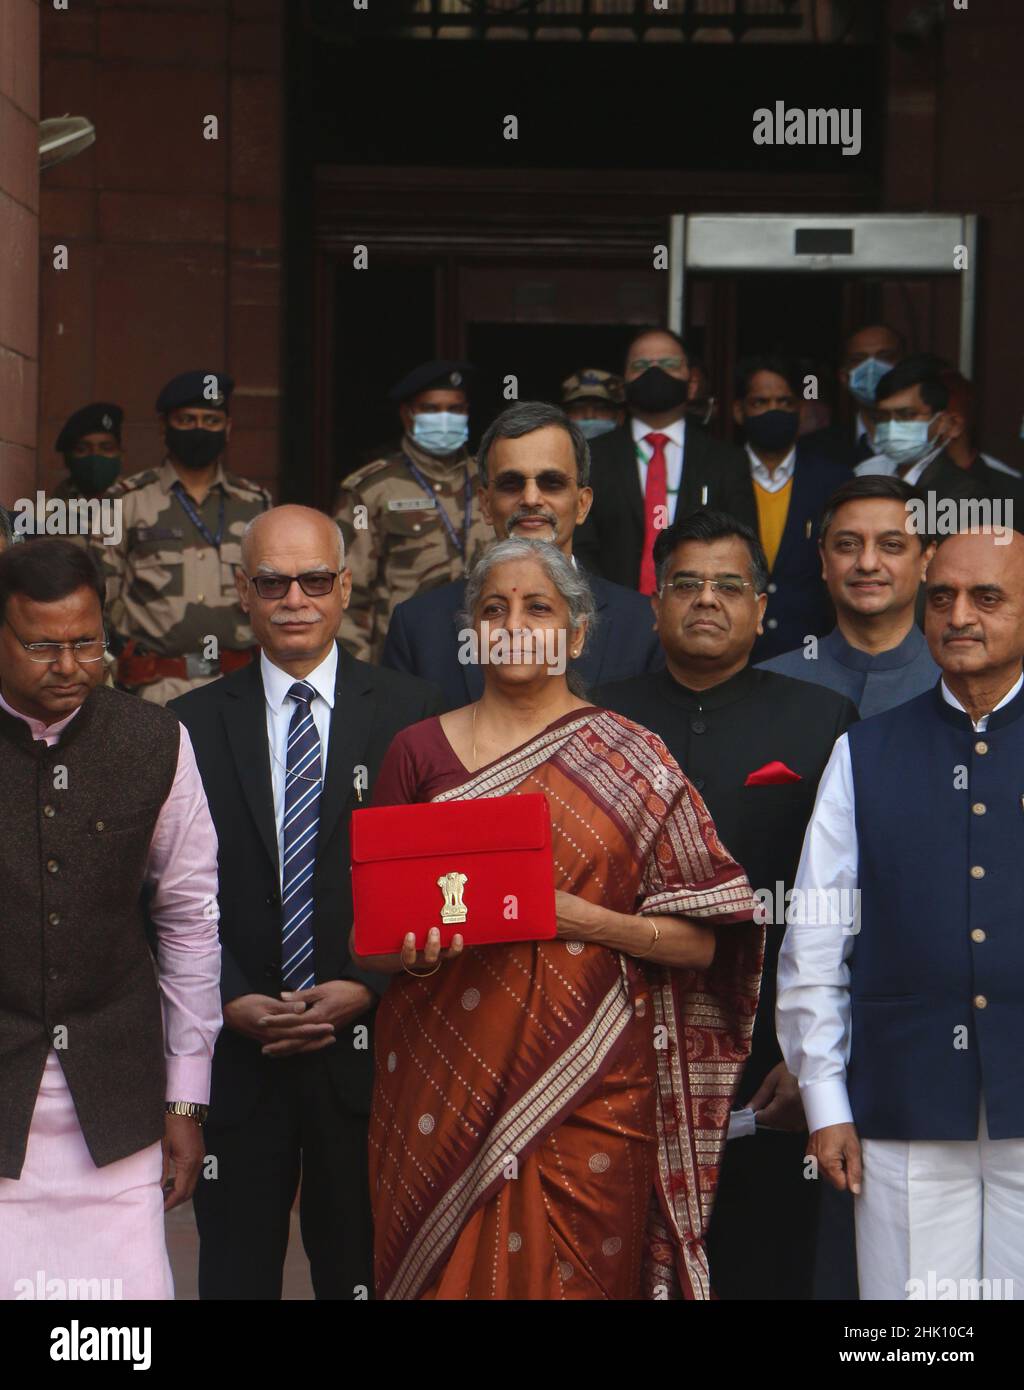 NEW DELHI, INDIA - FEBRUARY 1: Union Minister of Finance Nirmala Sitharaman is seen holding the tab instead of traditional ‘bahi khata' along with MoS Finance Pankaj Chaudhary, Bhagwat Karad and other senior officials before leaving from Ministry of Finance to the Parliament to present Union Budget 2022-23 on February 1, 2022 in New Delhi, India. Nirmala Sitharaman, who presented Union Budget 2022 in Parliament on Tuesday, said that it will lay the foundation for economic growth through public investment as Asia's third-largest economy emerges from a pandemic-induced slump. (Photo by Salman Al Stock Photo